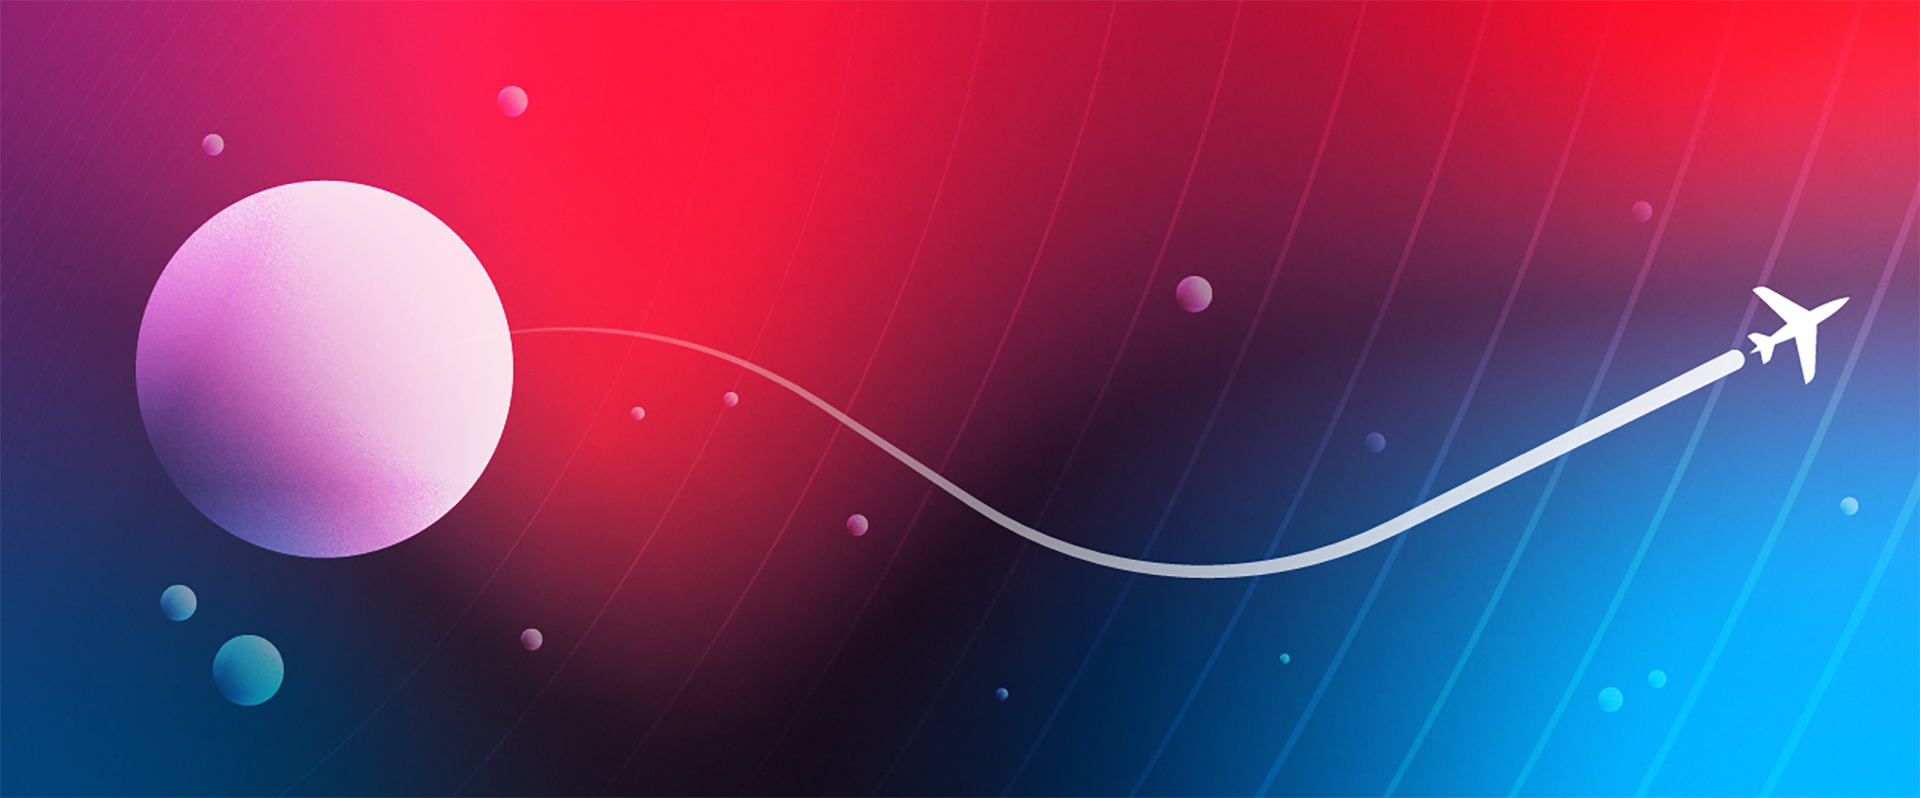 pink planet, airplane, ona blue and red abstract background